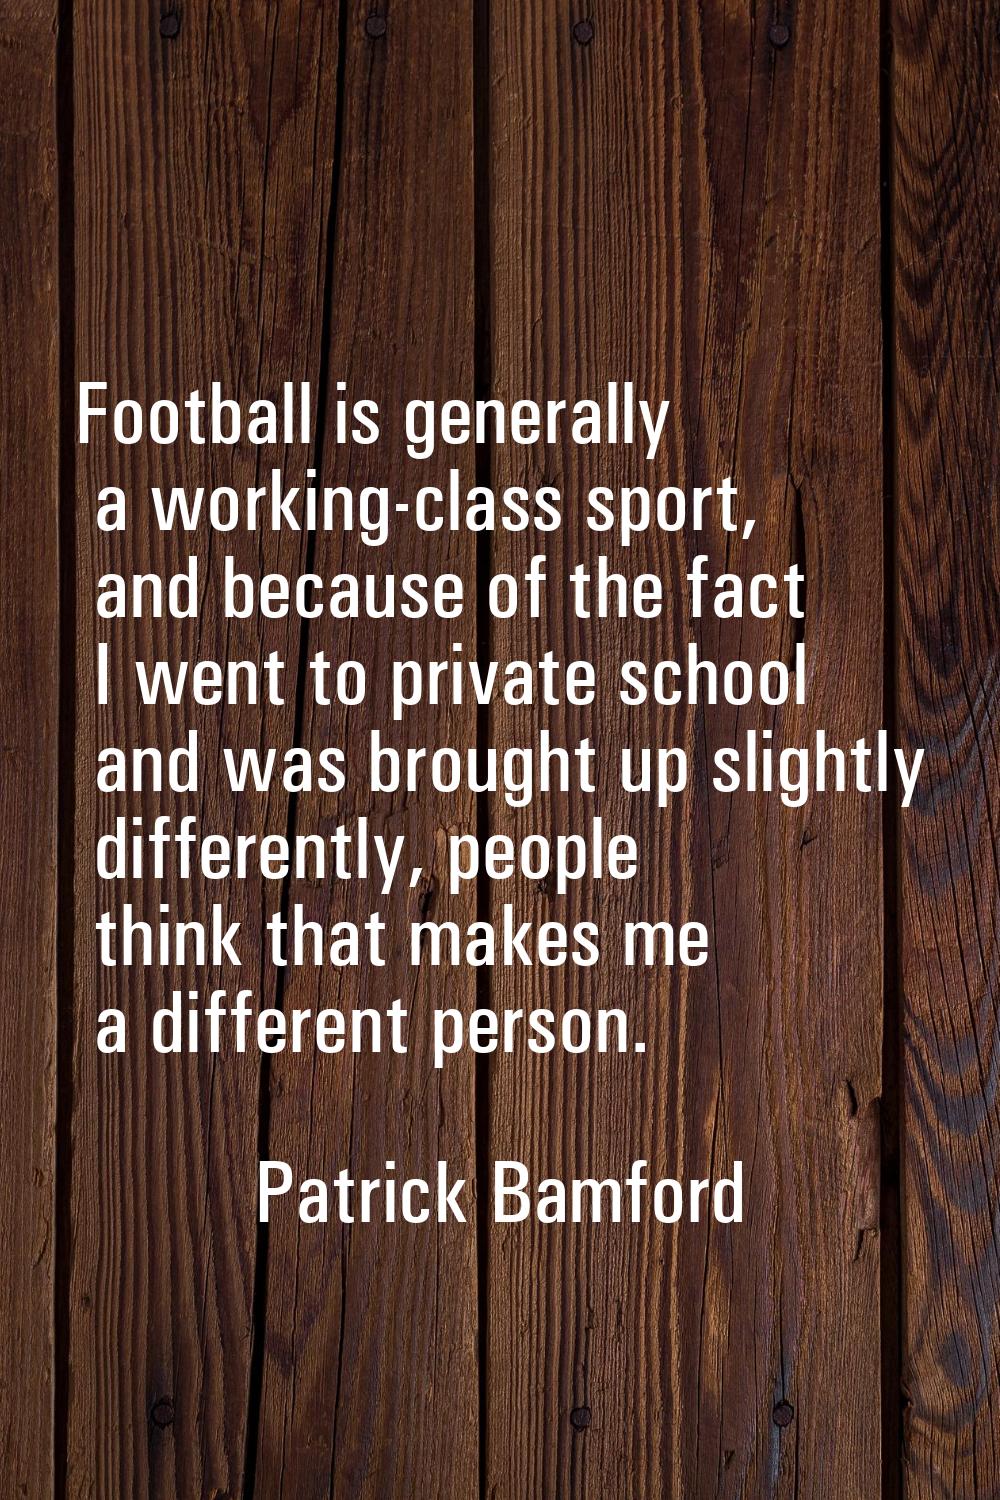 Football is generally a working-class sport, and because of the fact I went to private school and w